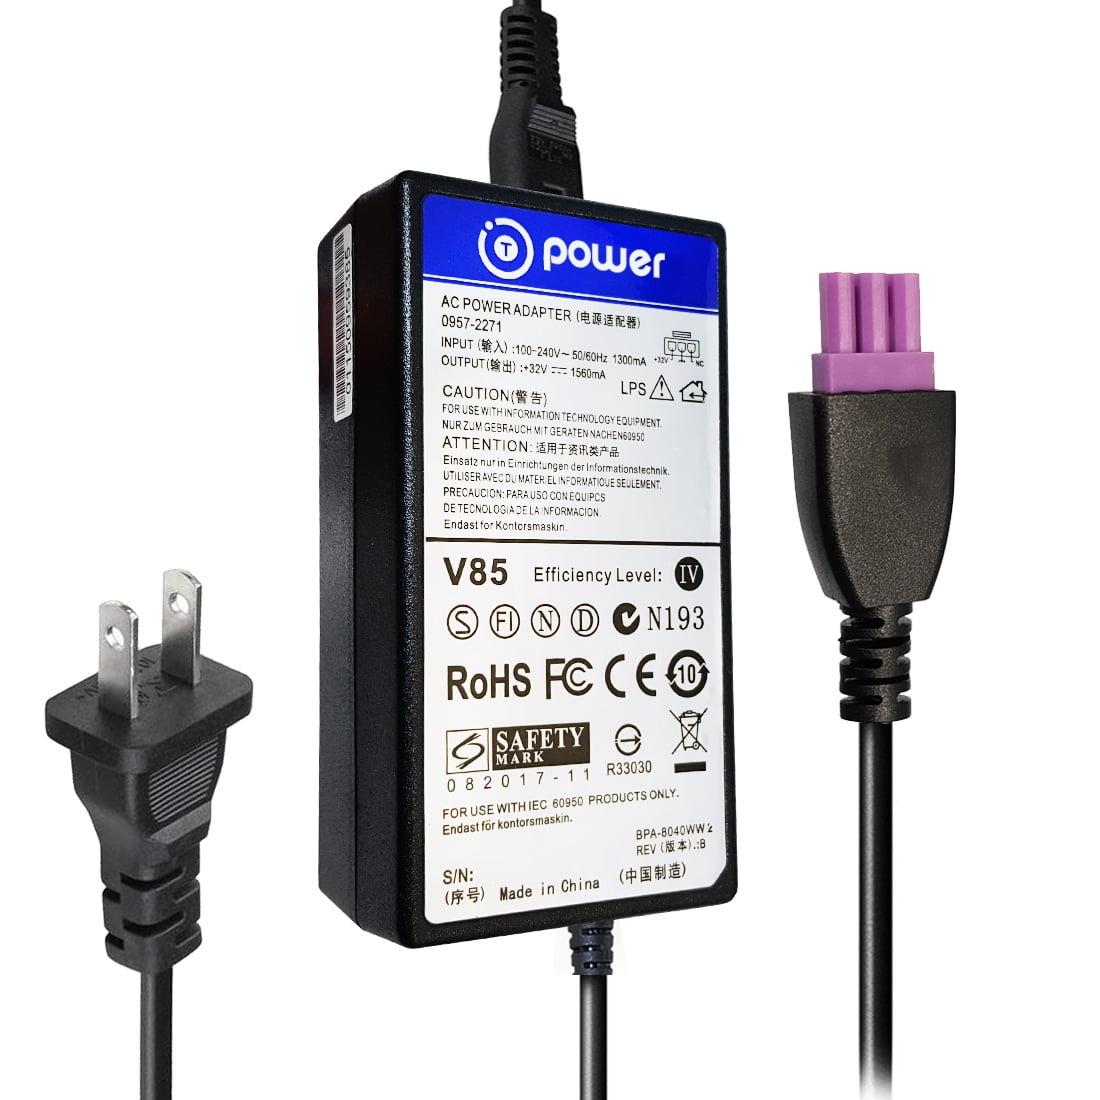 T POWER 32v for HP Photosmart / Officejet Advantage All-in-One Series Color  Printer Power Ac Dc adapter Charger PSU ( 3-Pin Purple Tip ) Power Supply  